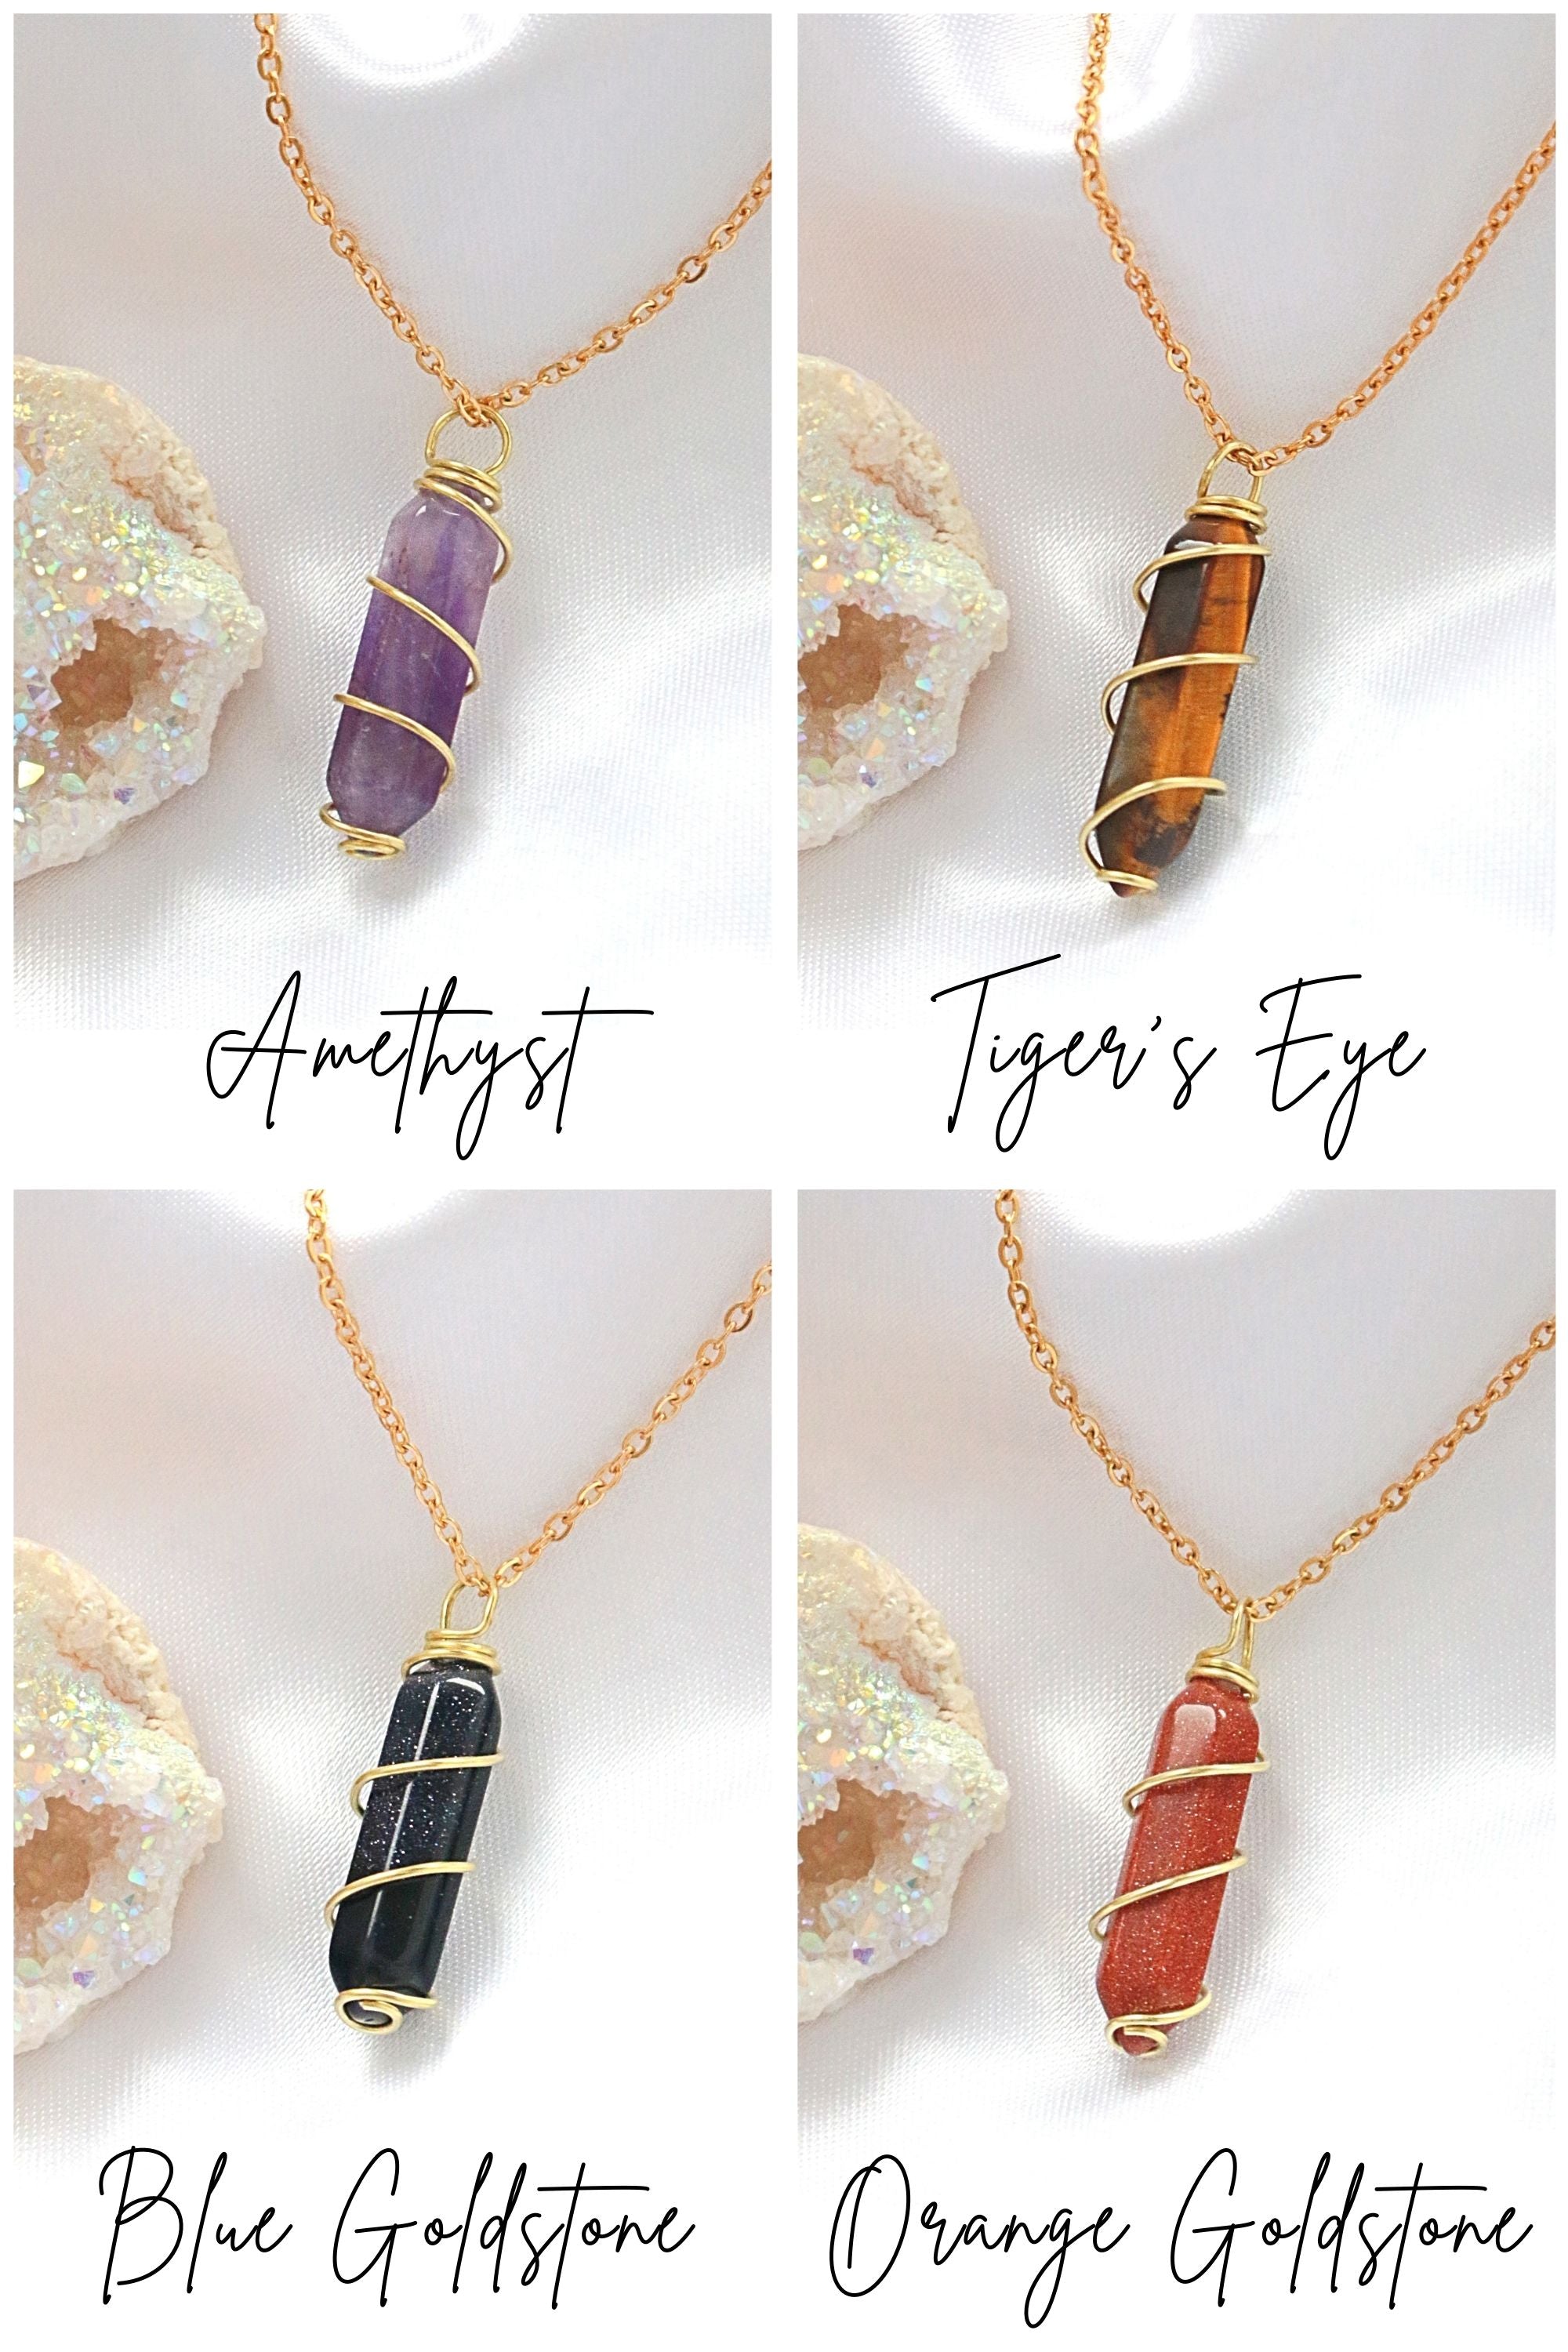 Natural Healing Crystal Pendant Necklace - Handmade with 18K Gold Plated Wire and Chain, Available in Multiple Gemstones - Necklaces - Bijou Her -  -  - 